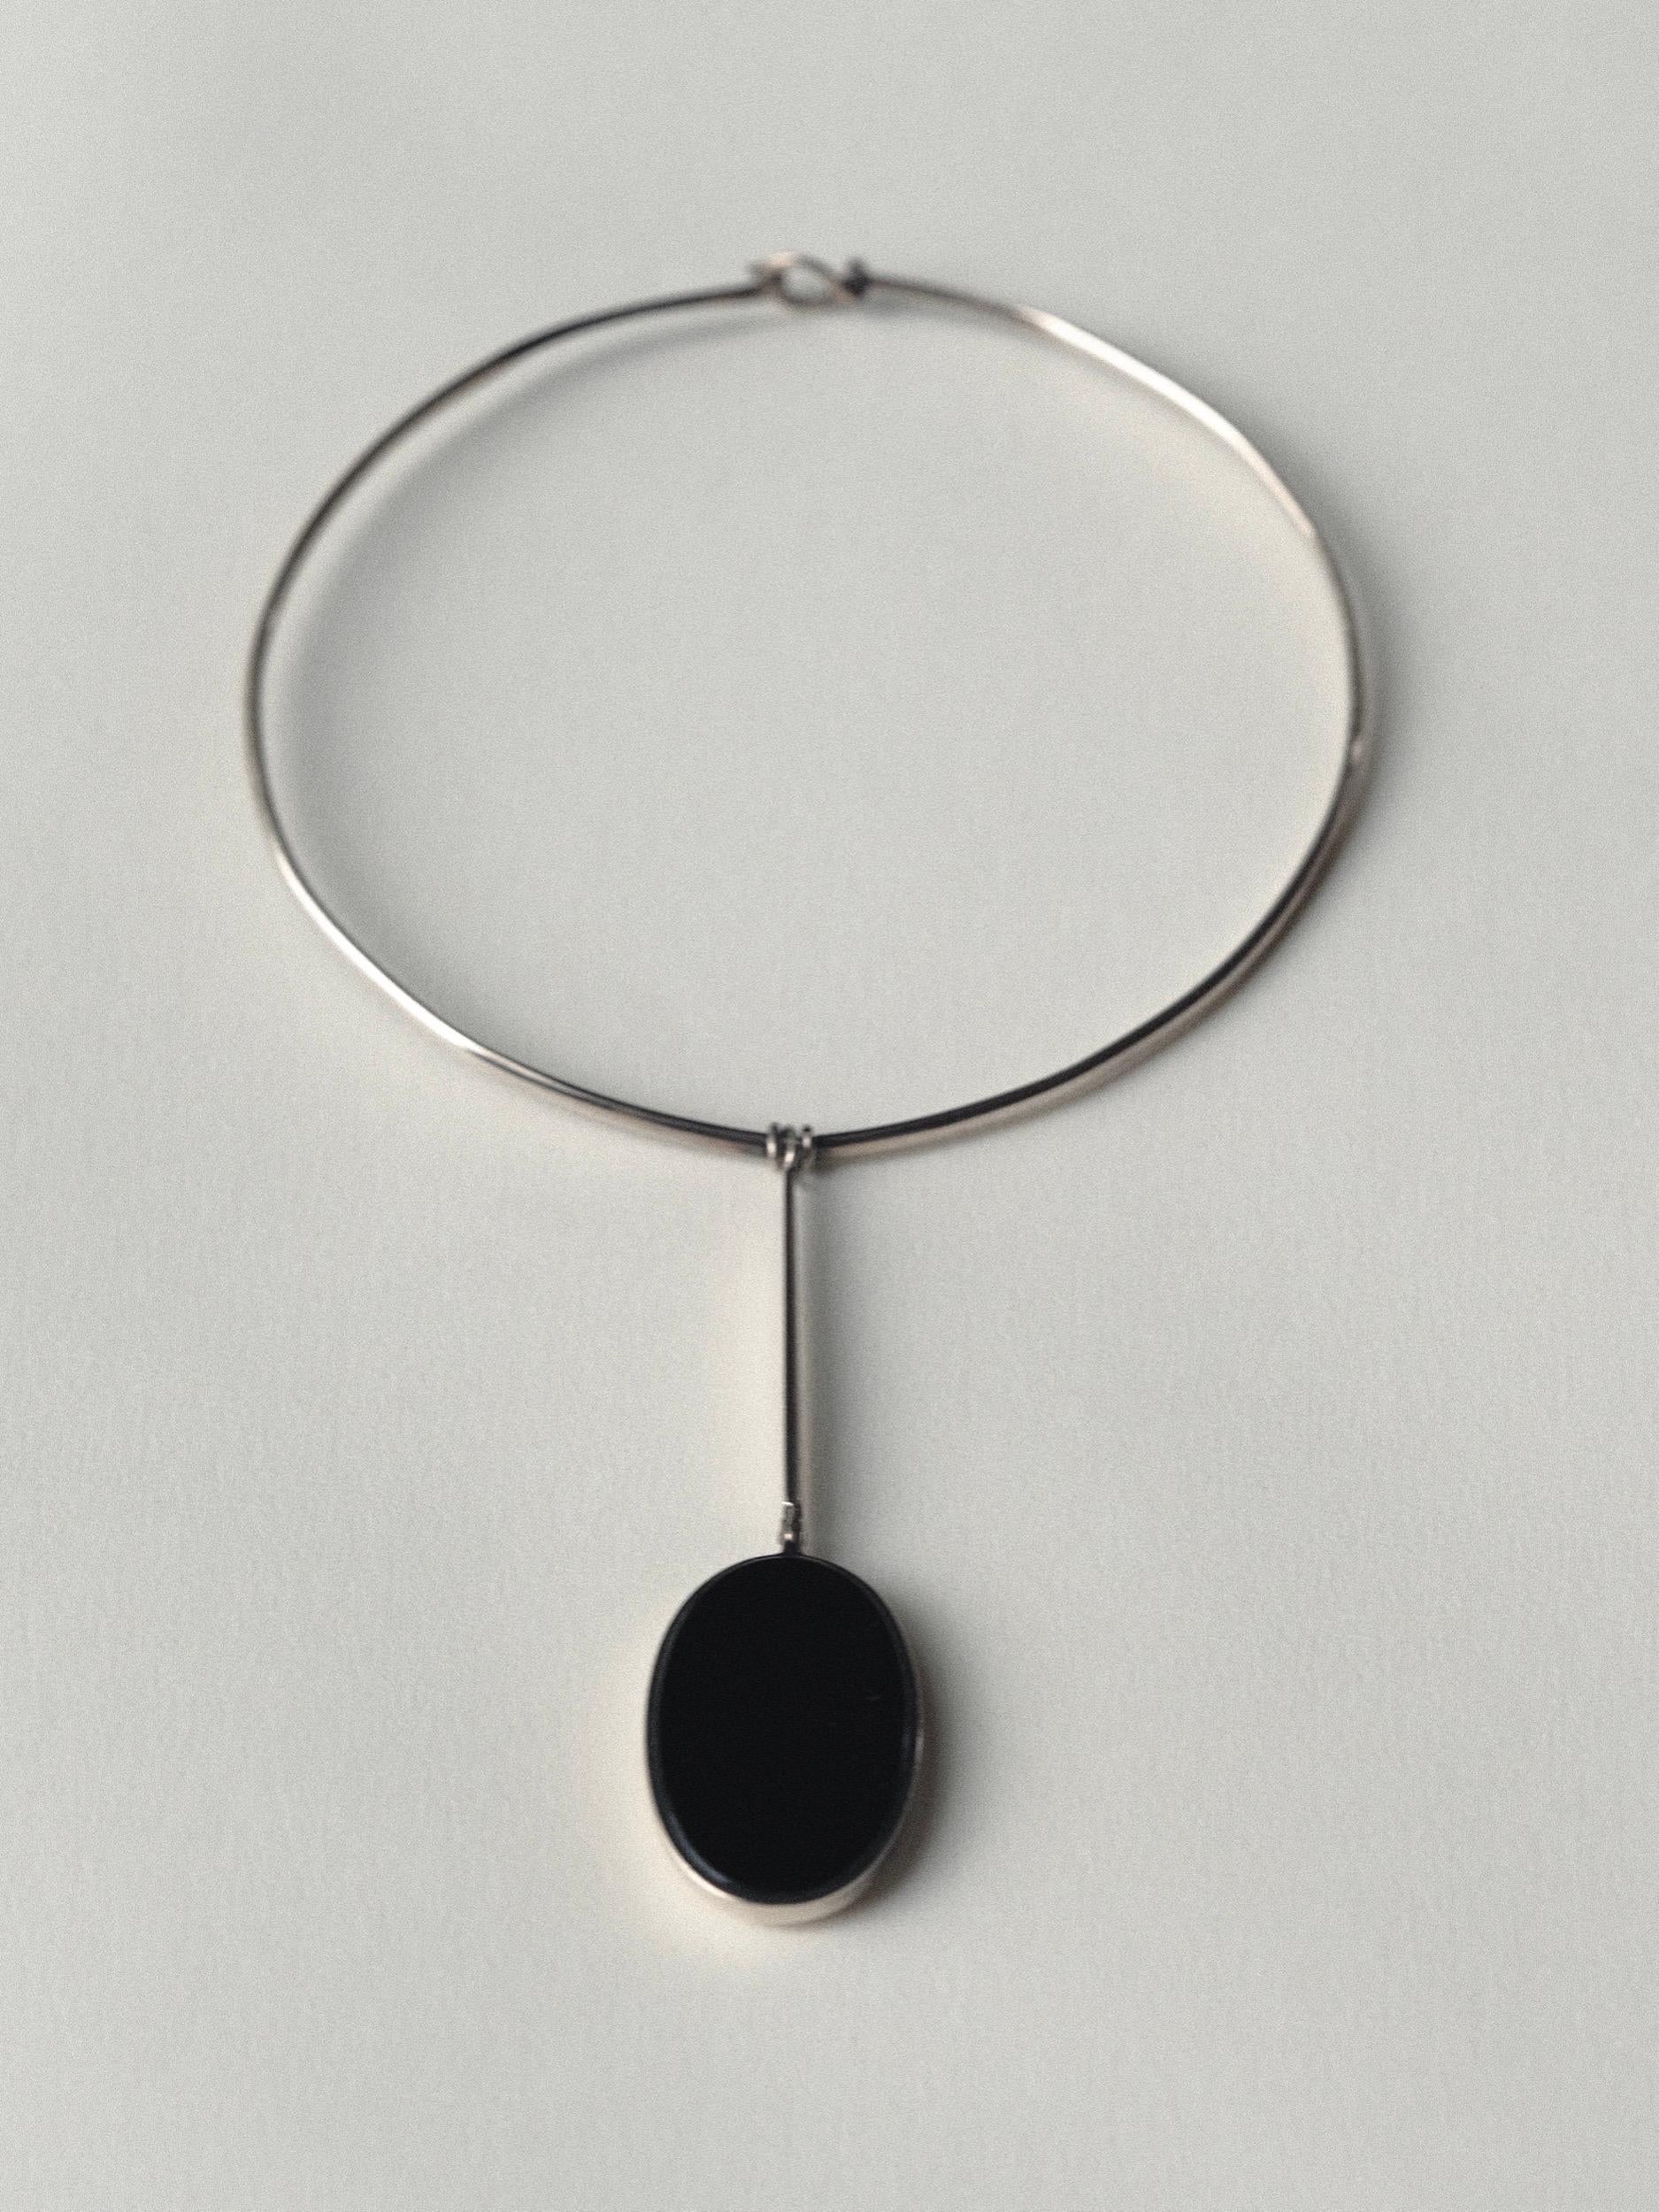 Silver Collar Drop Necklace by designer Joachim S'paliu
Oval cut black onyx stone set in silver
Articulates front to back at collar and stone
Handwrapped at collar to keep stationary
Shiny, smooth onyx at front
Bevel with back of matte stone at back